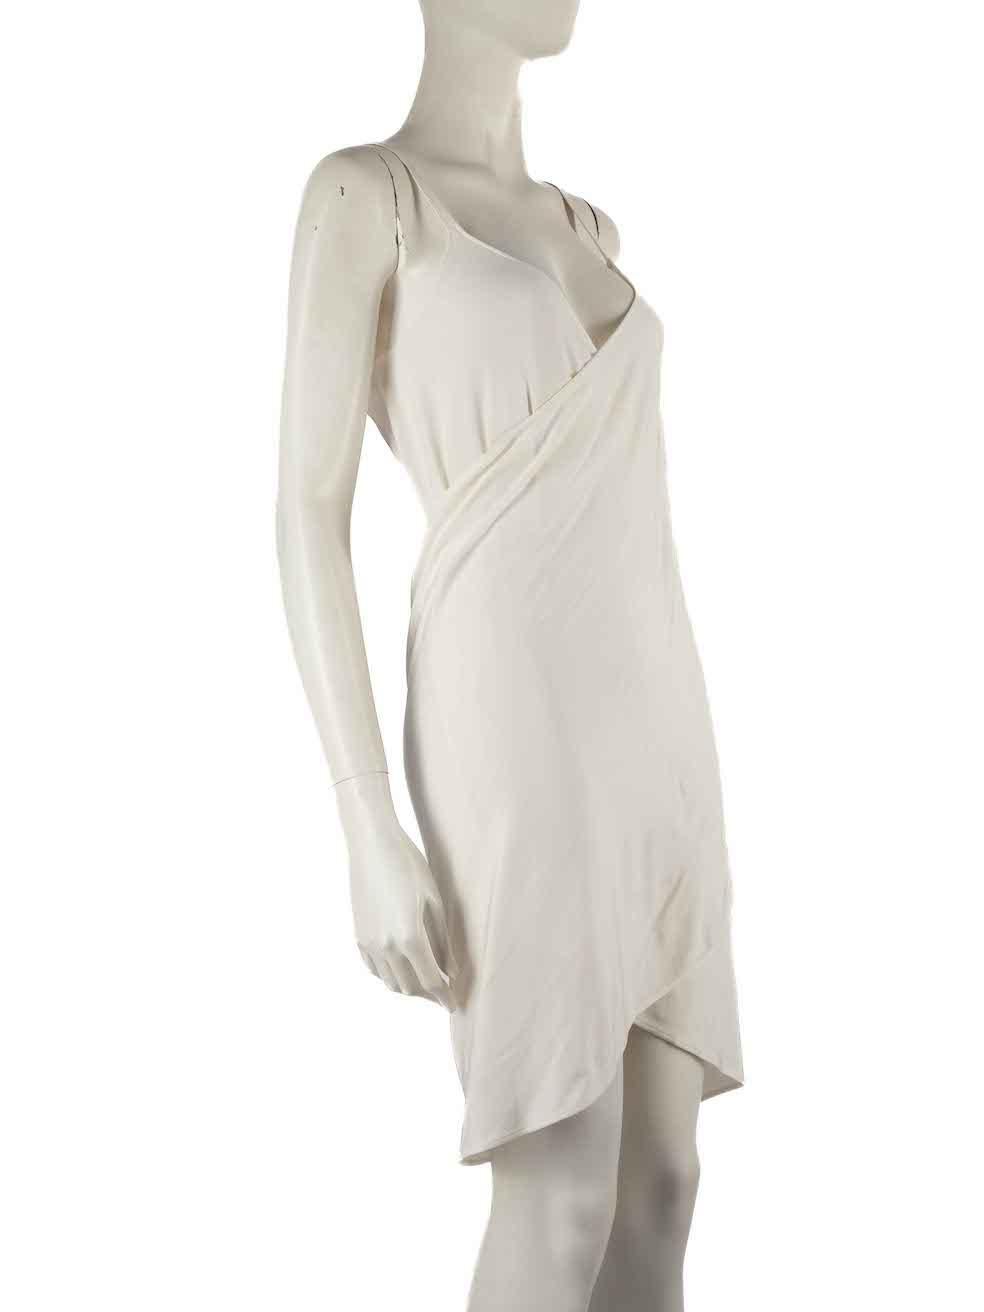 CONDITION is Never worn, with tags. No visible wear to the dress is evident on this new La Perla designer resale item.
 
 
 
 Details
 
 
 Off white
 
 Viscose
 
 Leather straps
 
 Hook strap fastening
 
 Wrap dress
 
 Semisee-through
 
 Mini
 
